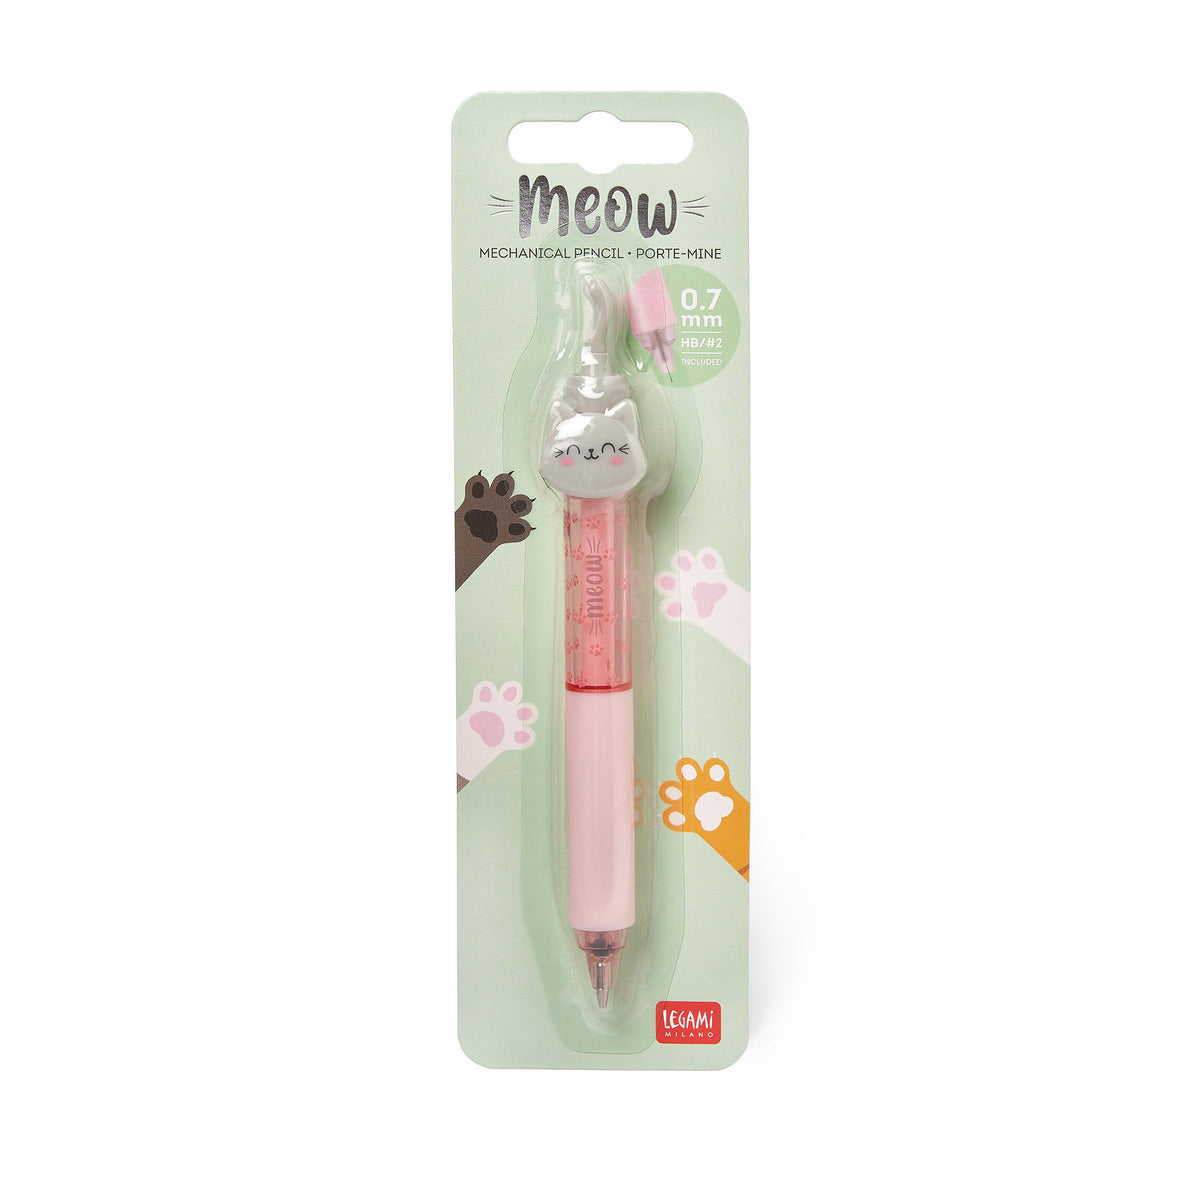 An image of a pink mechanical pencil with grey cat on the top in it&#39;s packaging.